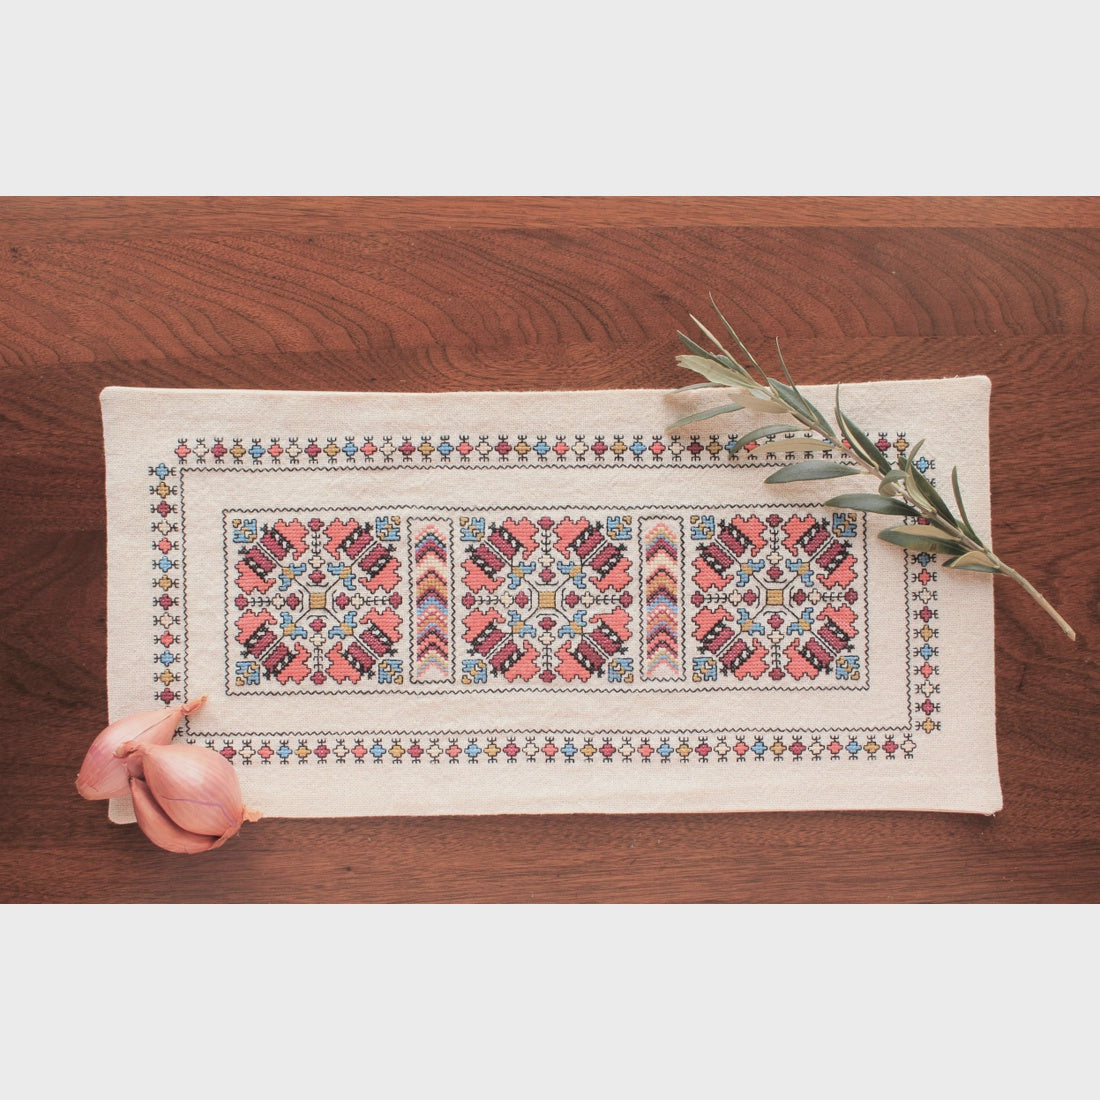 Despina's Anemone Cross Stitch Table Runner Kit